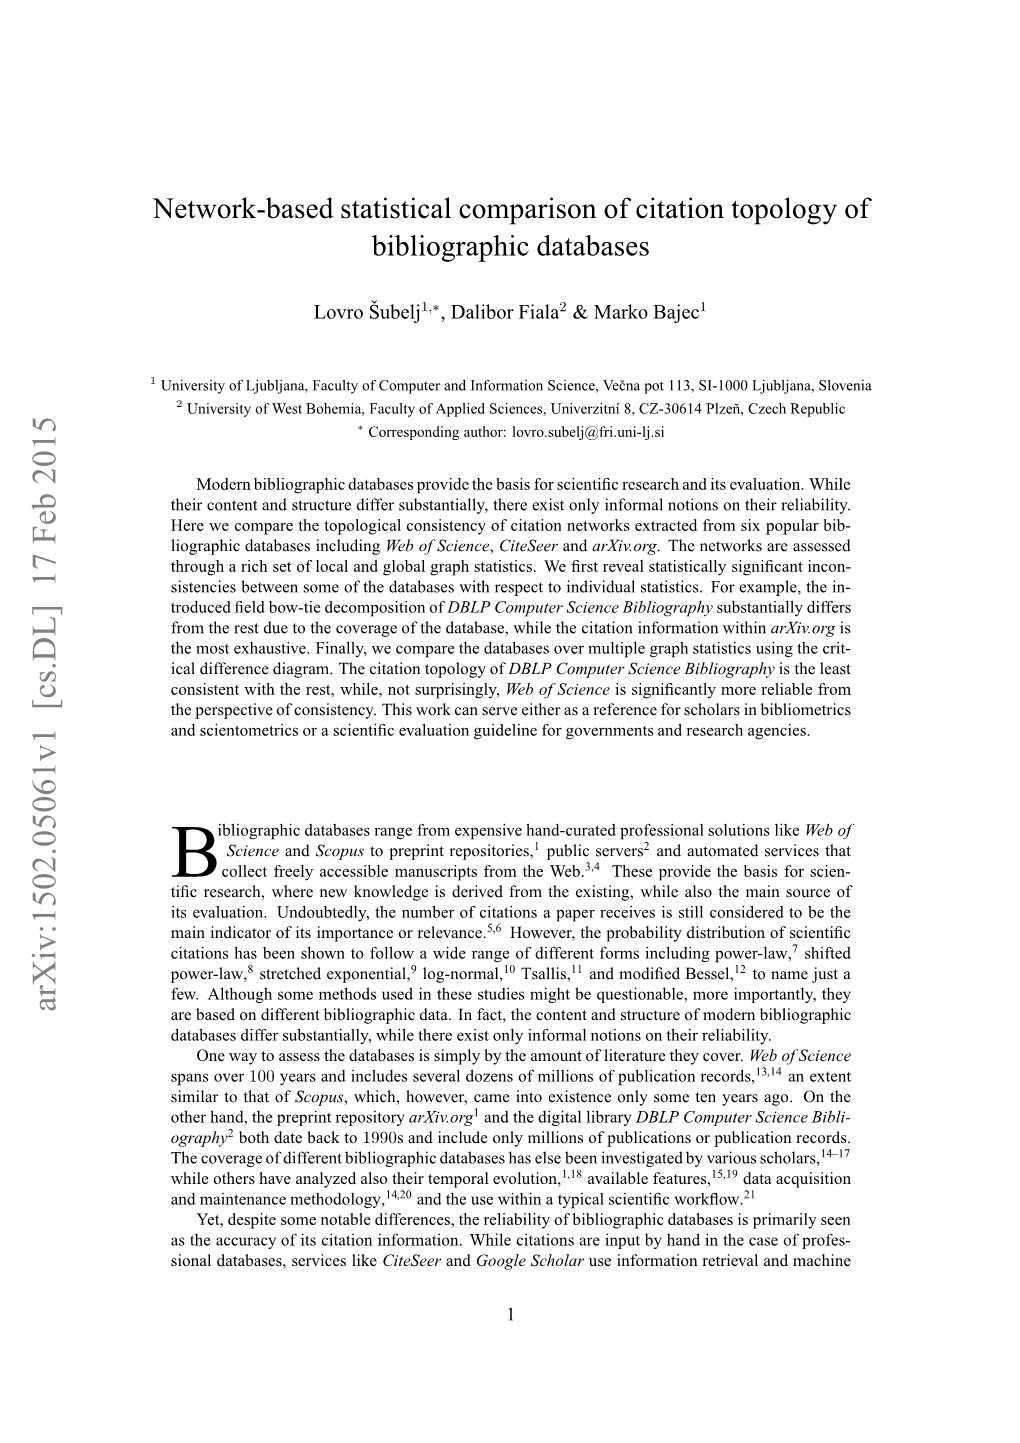 Network-Based Statistical Comparison of Citation Topology of Bibliographic